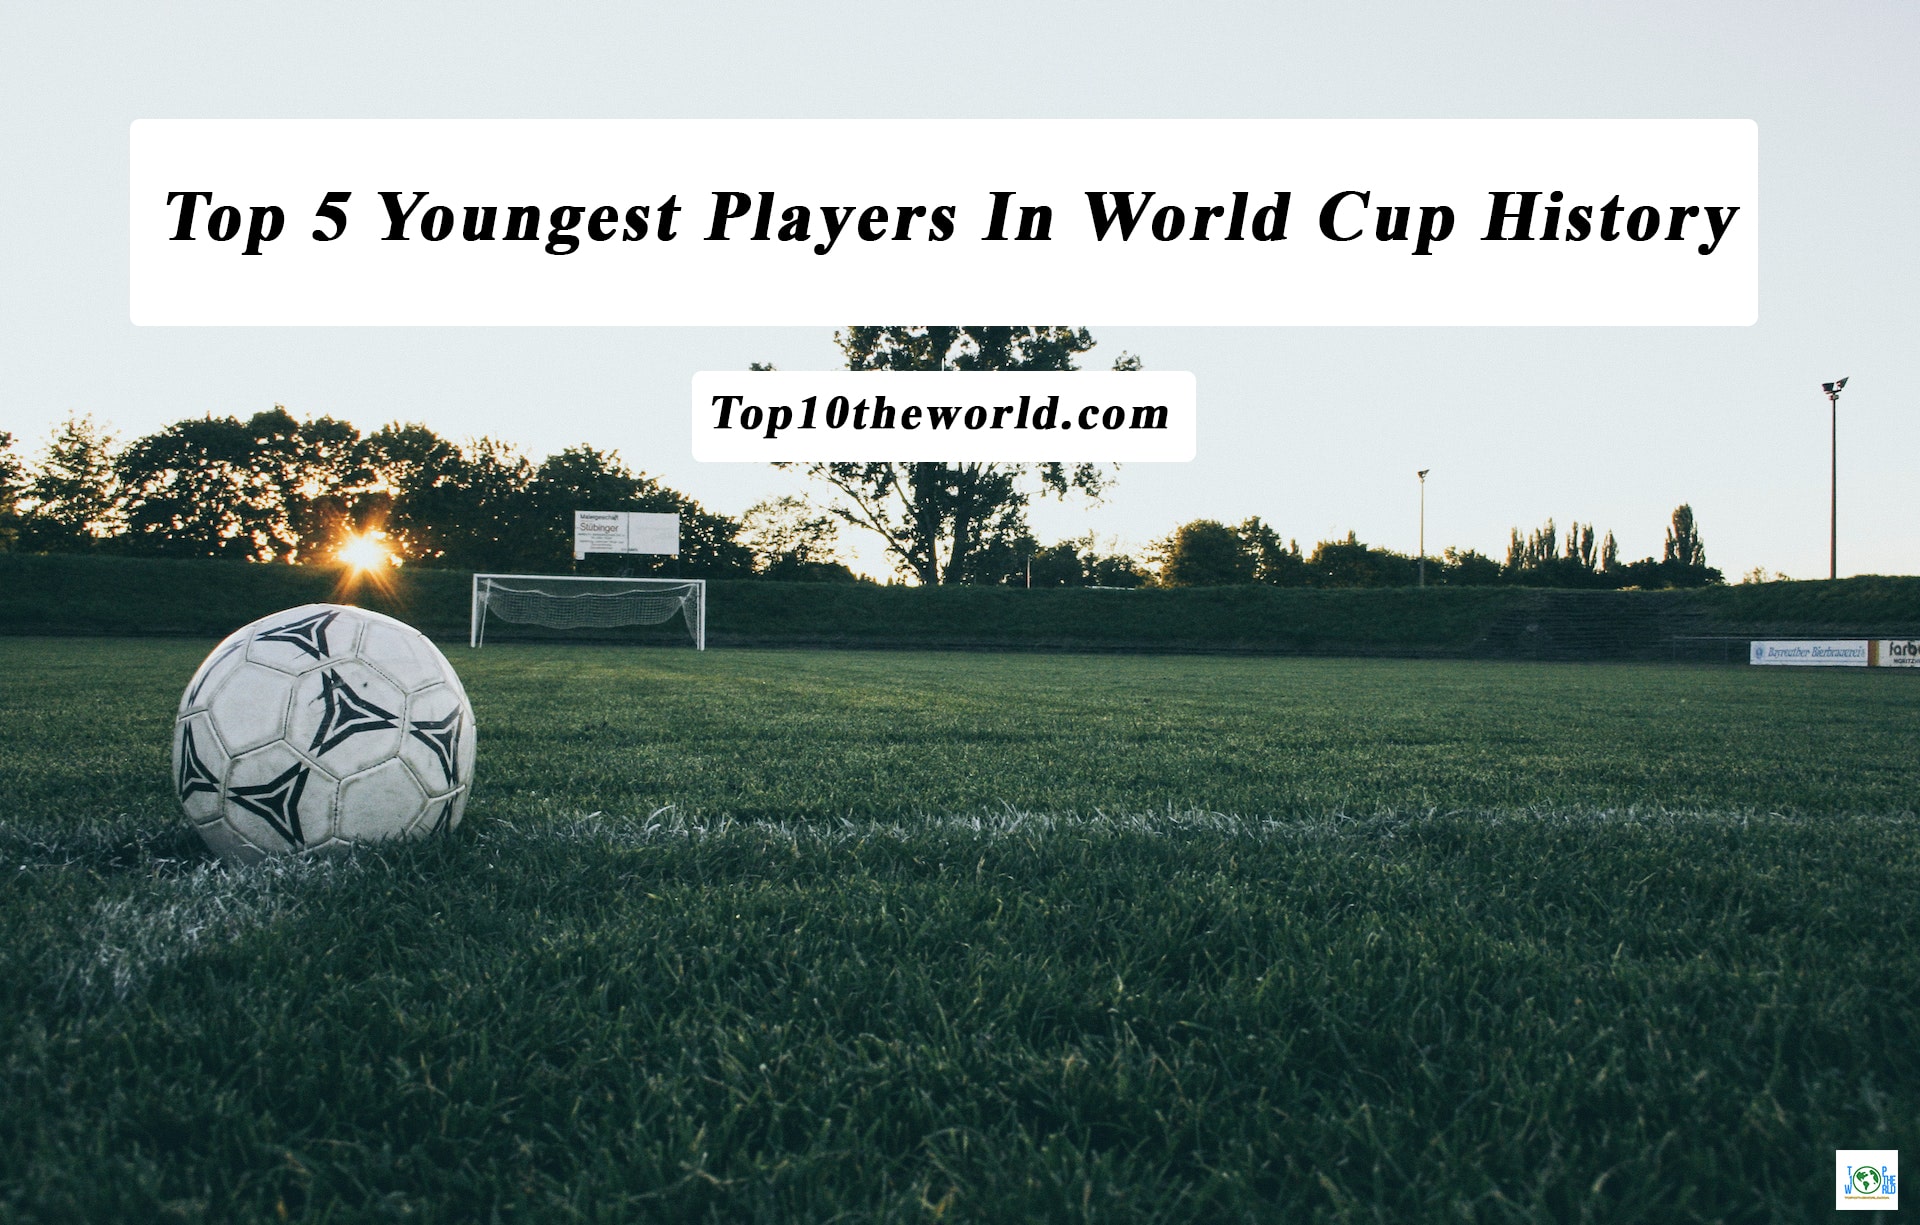 Top 5 Youngest Players In World Cup History